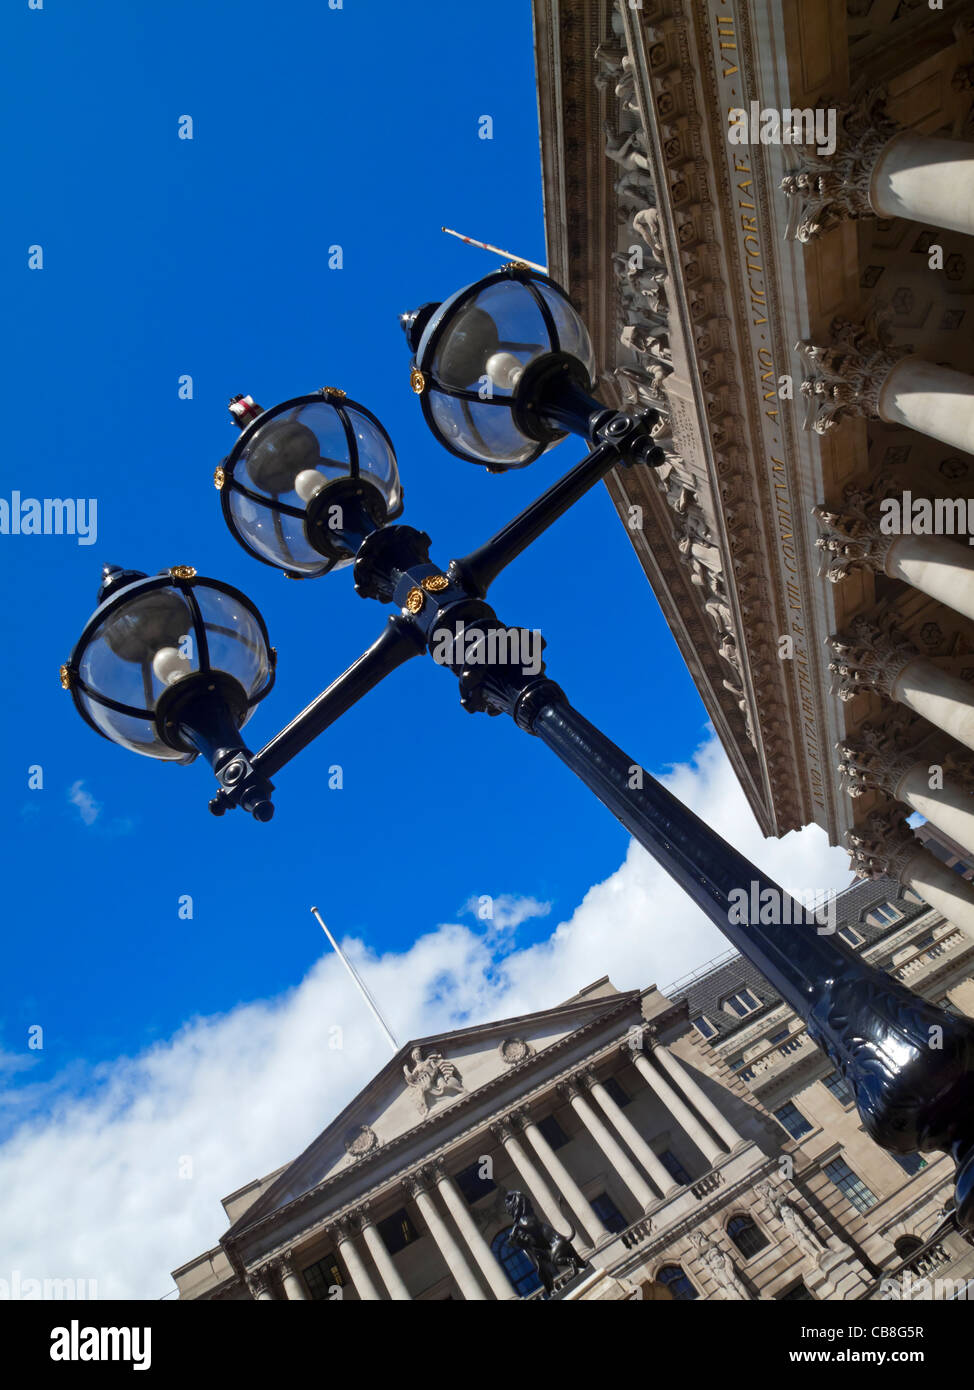 The Bank of England and The Royal Exchange building on the right at Cornhill in the City of London financial district England UK Stock Photo